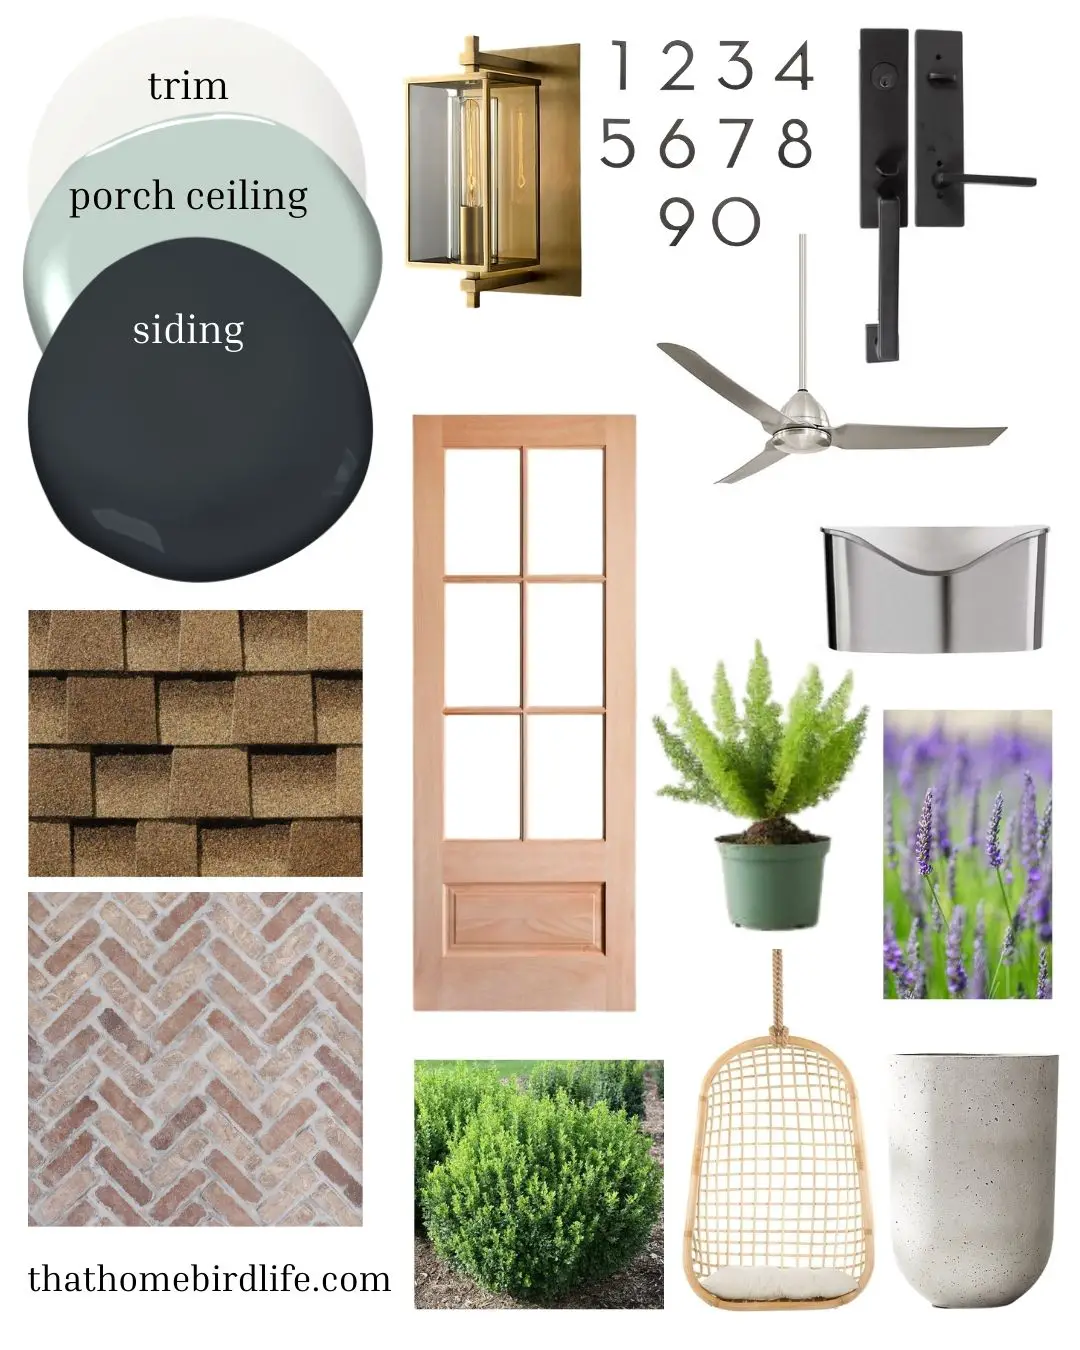 moodboard showing choices for exterior